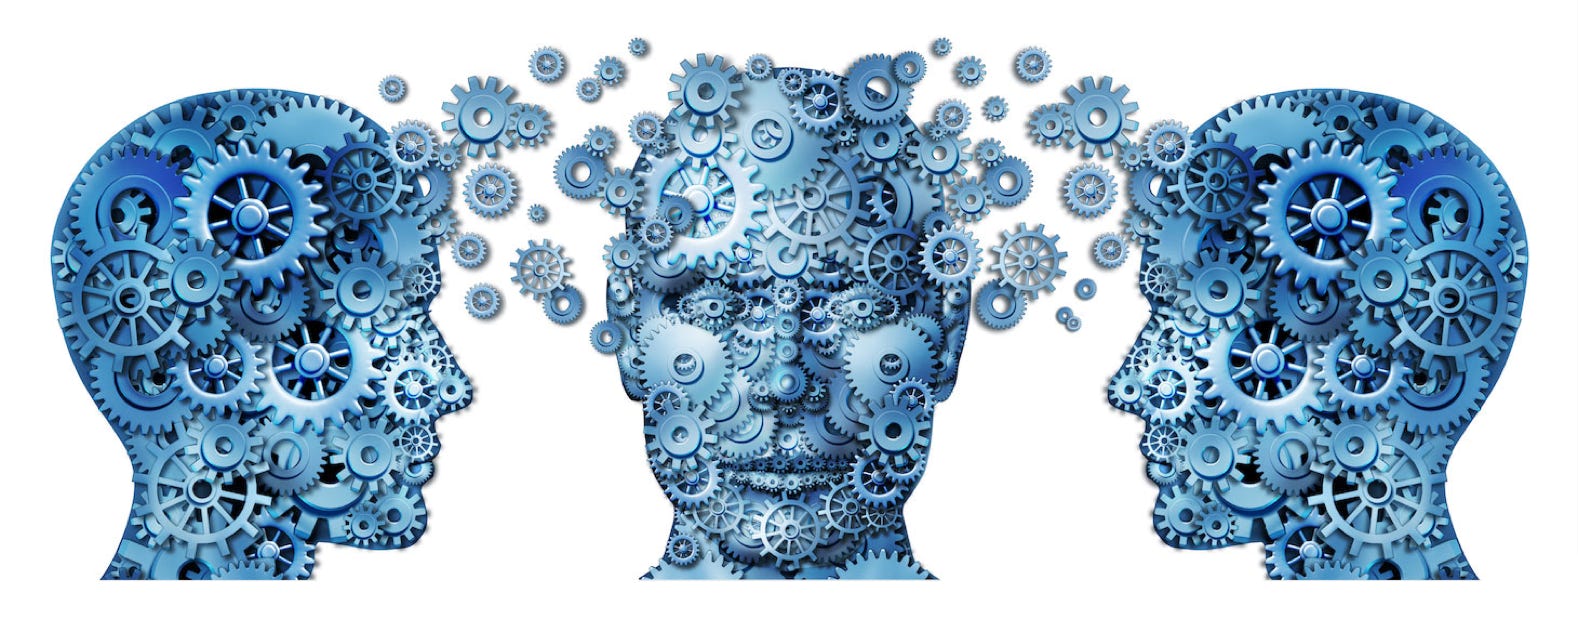 Image of three heads made of cogs and the cogs from each head are mixing with each of the other heads.